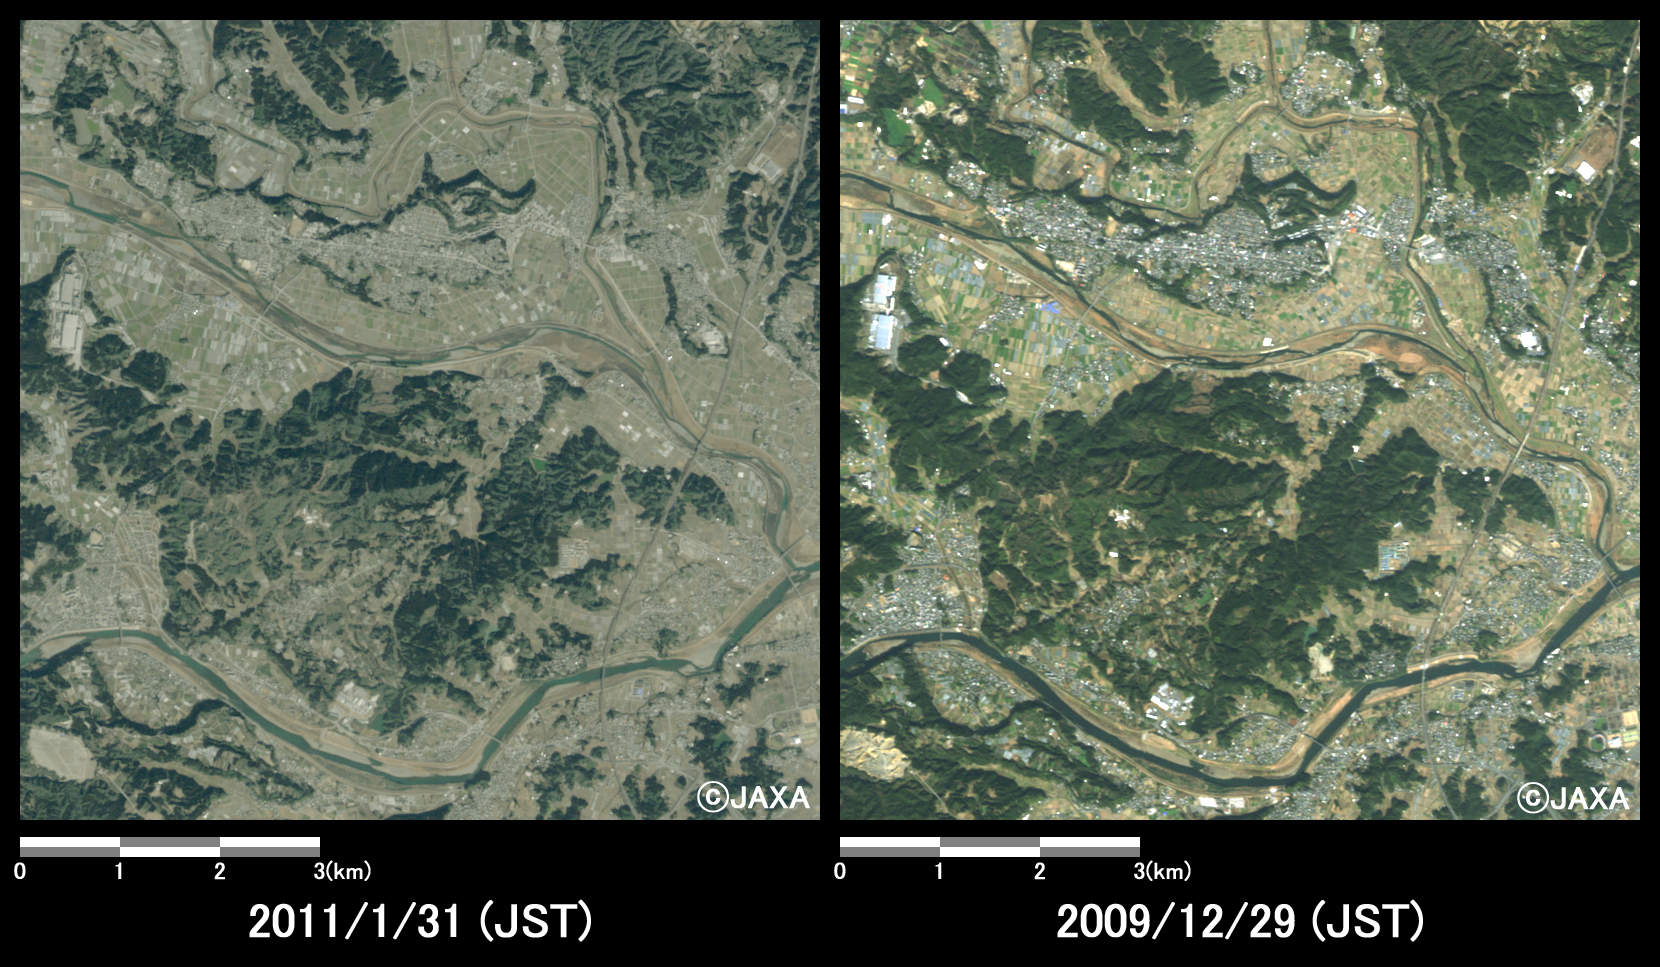 Fig.6: Enlarged image of western part of Miyazaki City. (64 square kilometers, left: January 31, 2011; right: December 29, 2009).